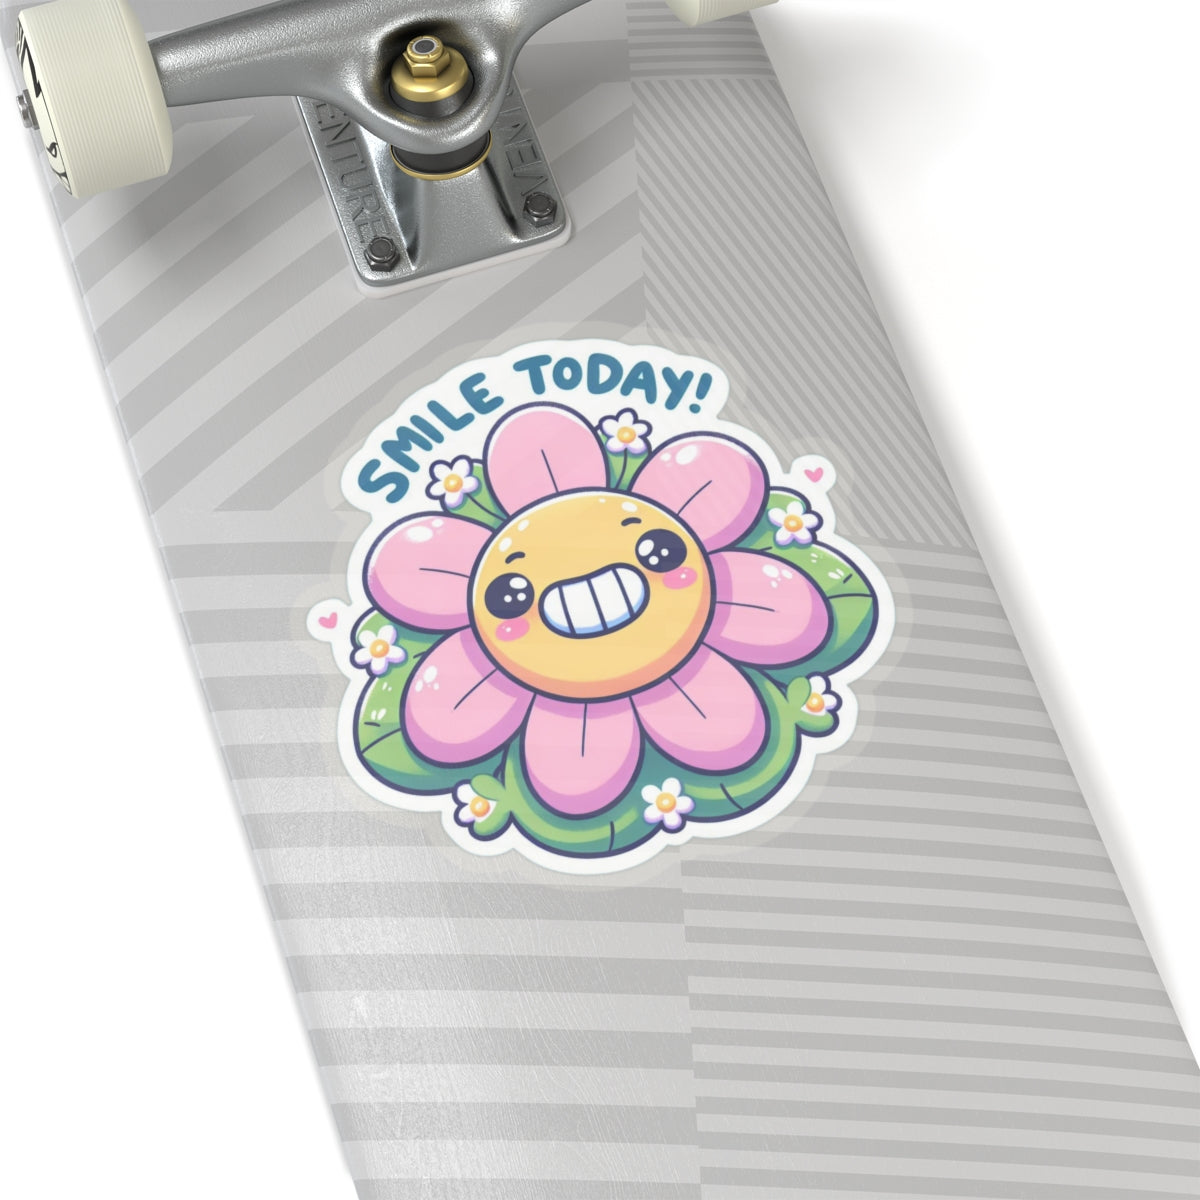 Smile Today Kiss-Cut Stickers